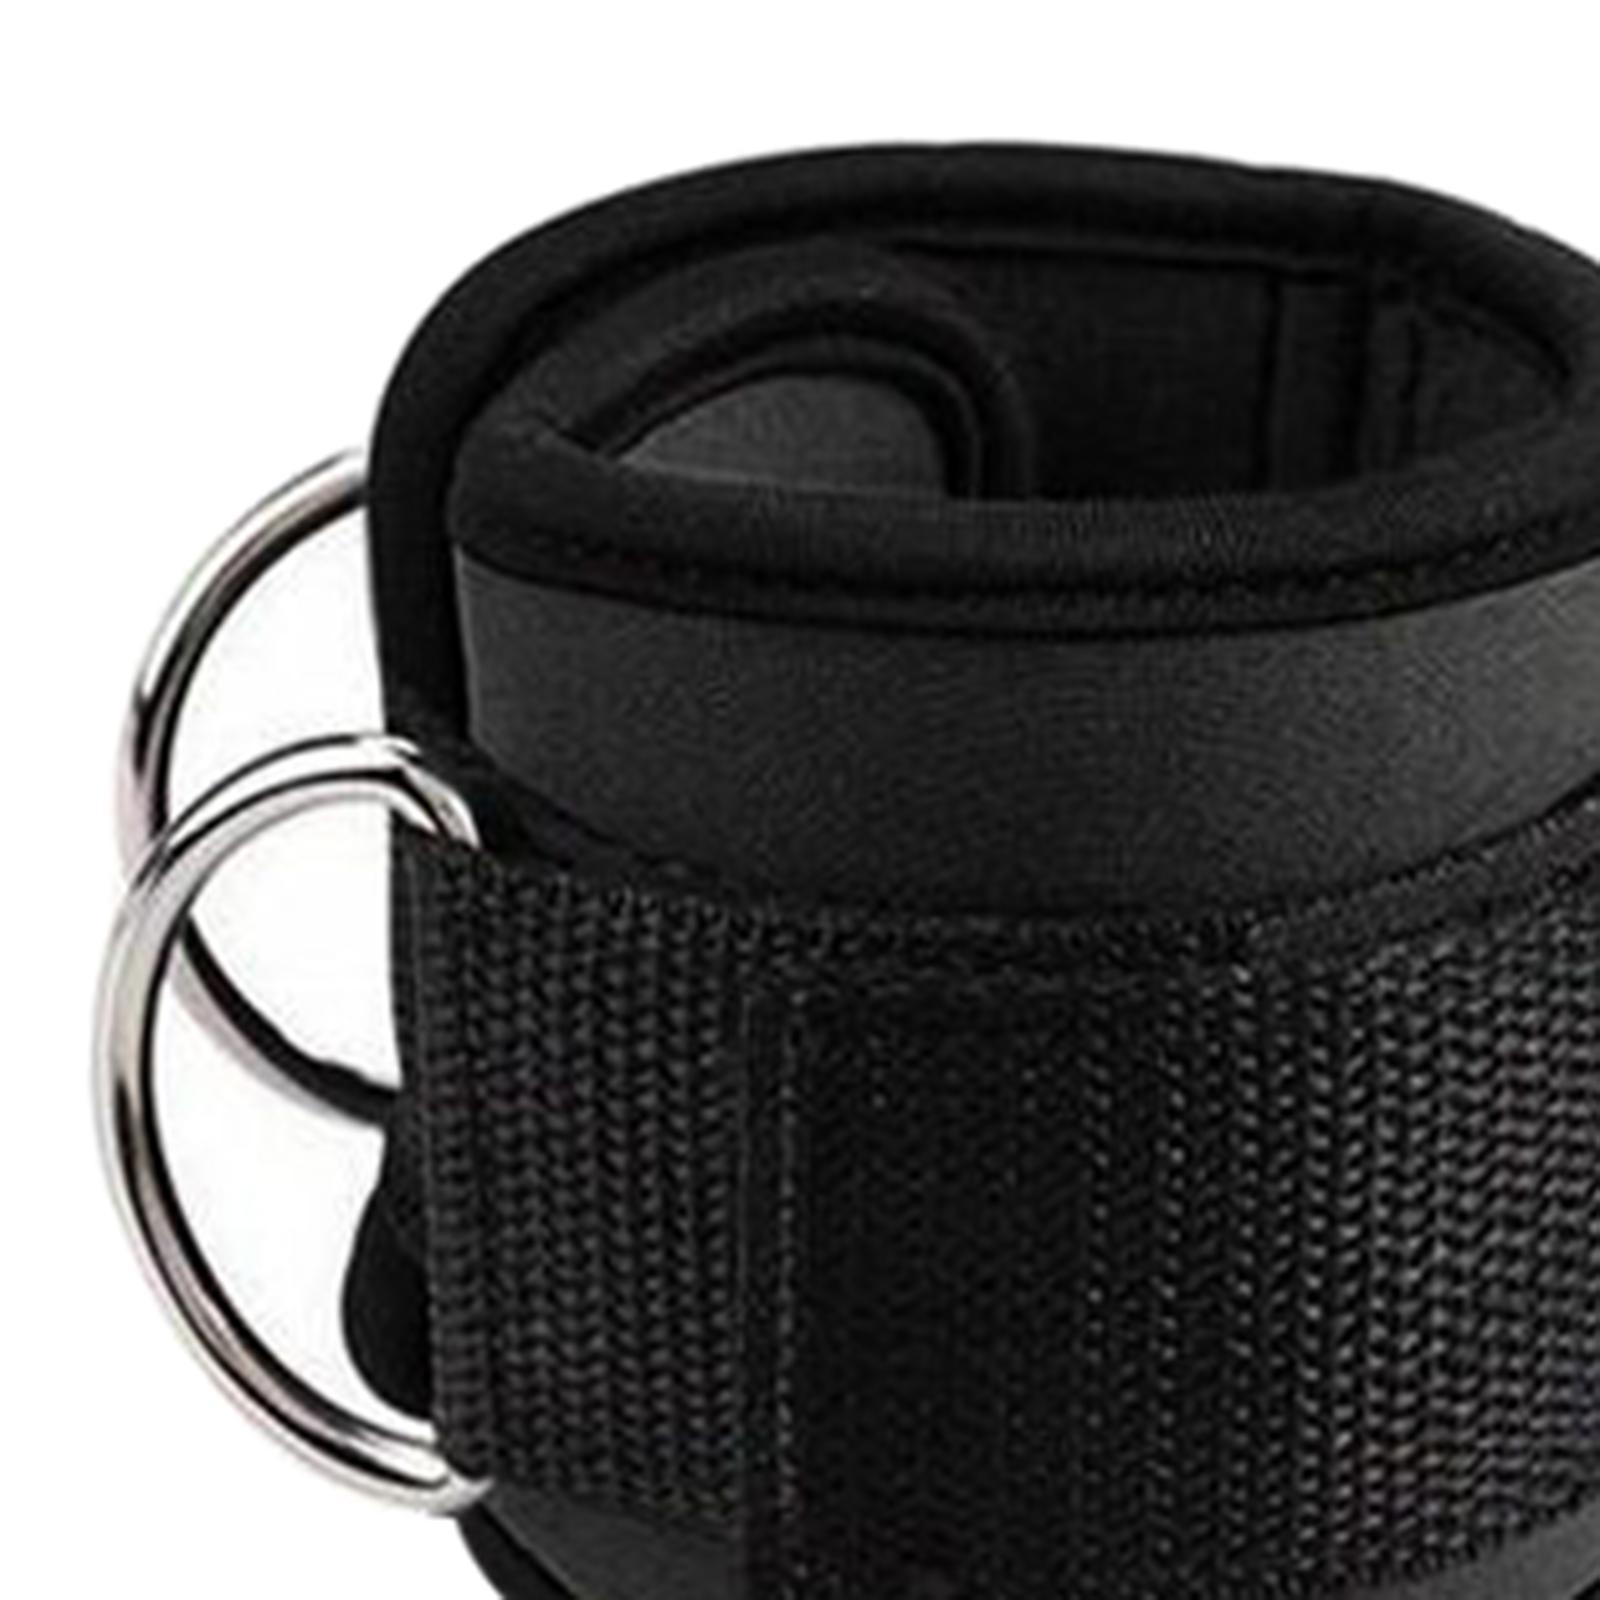 Ankle Strap Bands Exercise Leg Extensions Attachments for Gym Black